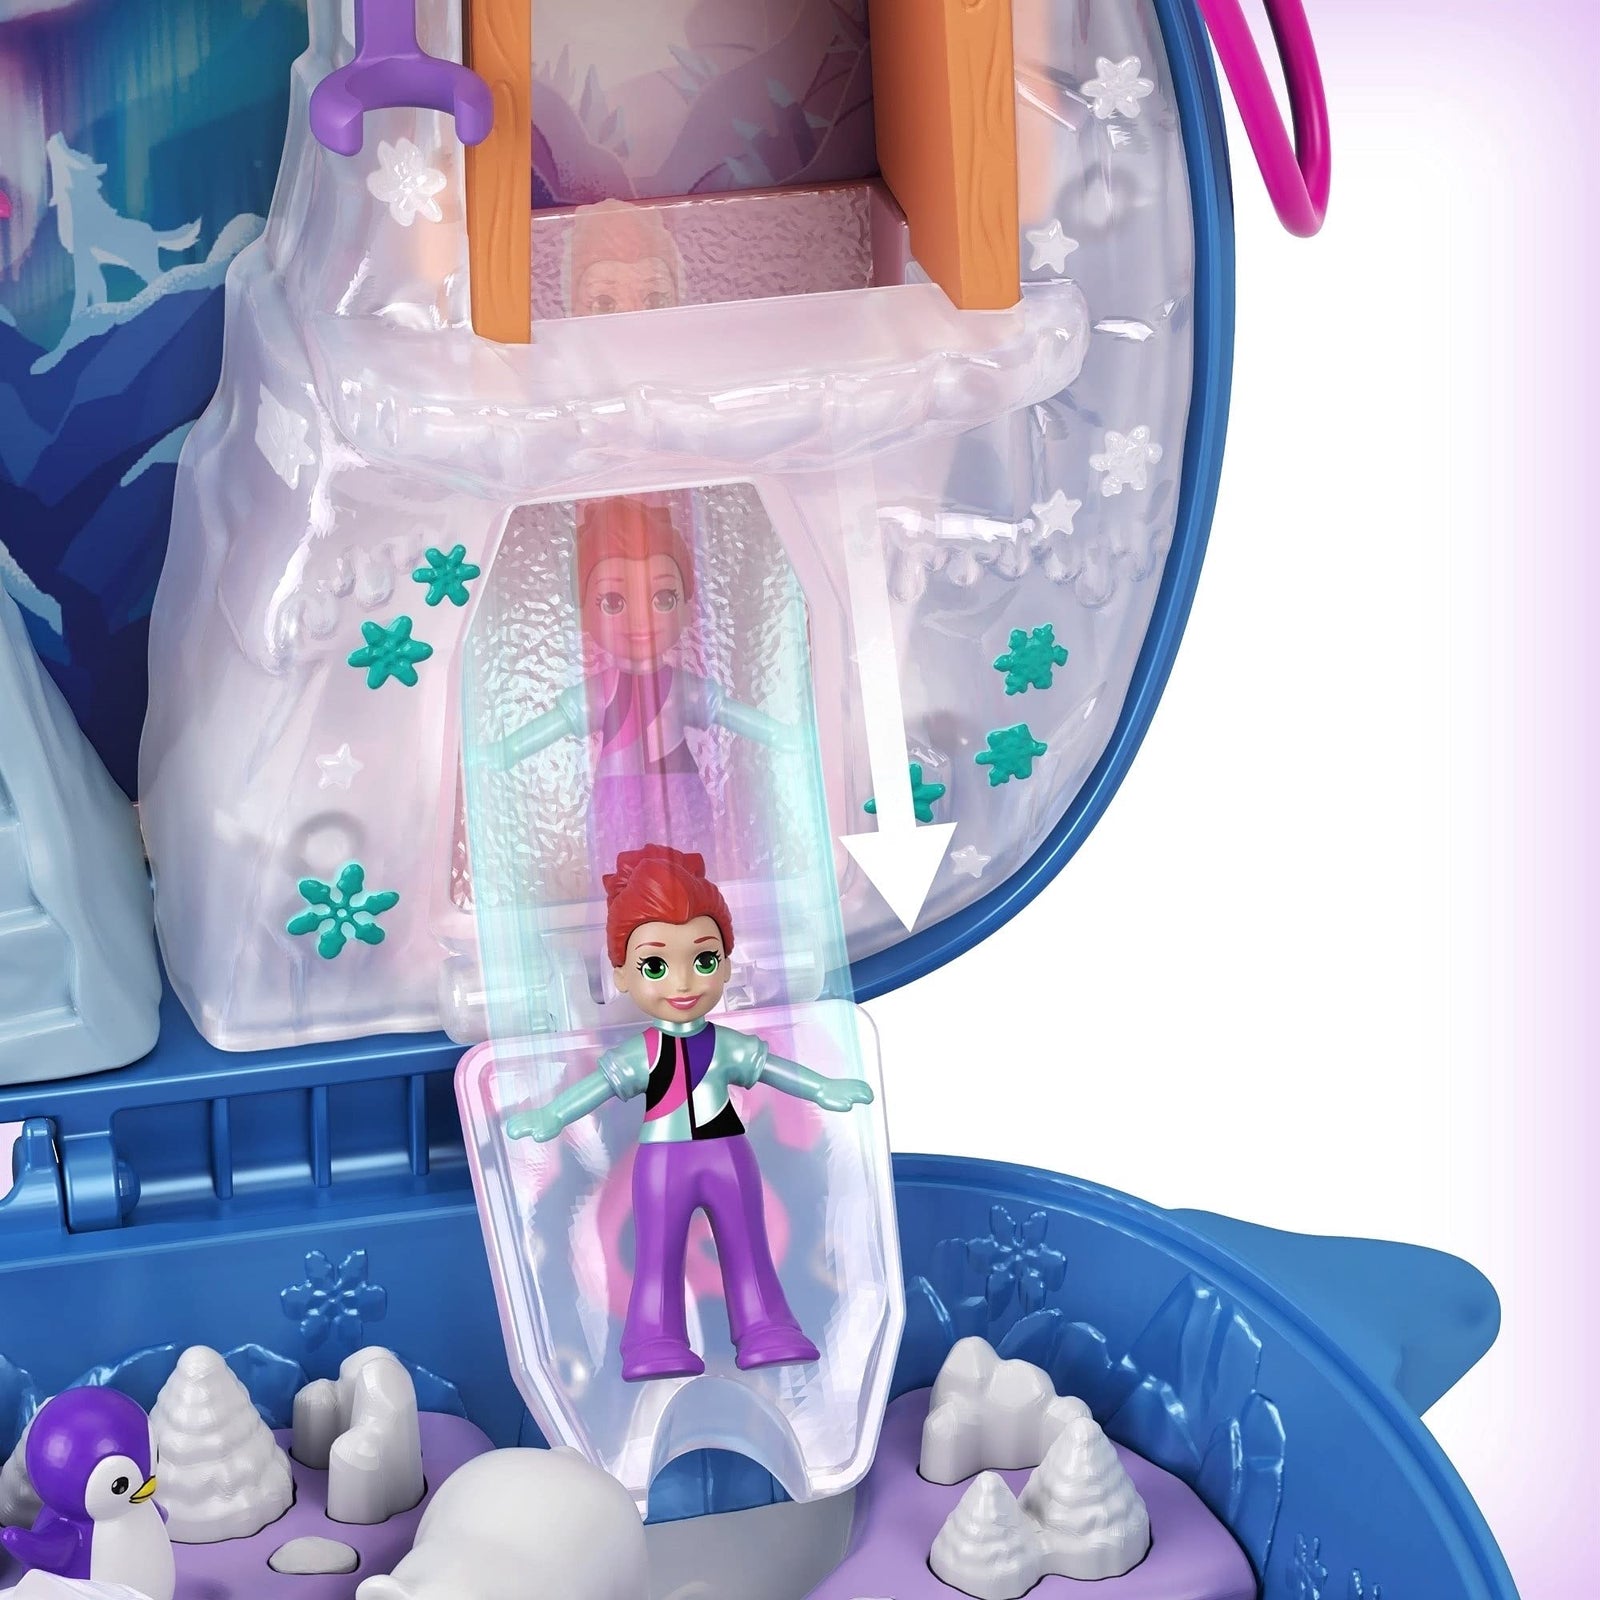 Polly Pocket Freezin' Fun Narwhal Compact with Fun Reveals, Micro Polly and Lila Dolls, Husky Dog & Sled, Polar Bear Figure & Sticker Sheet; for Ages 4 Years Old & Up